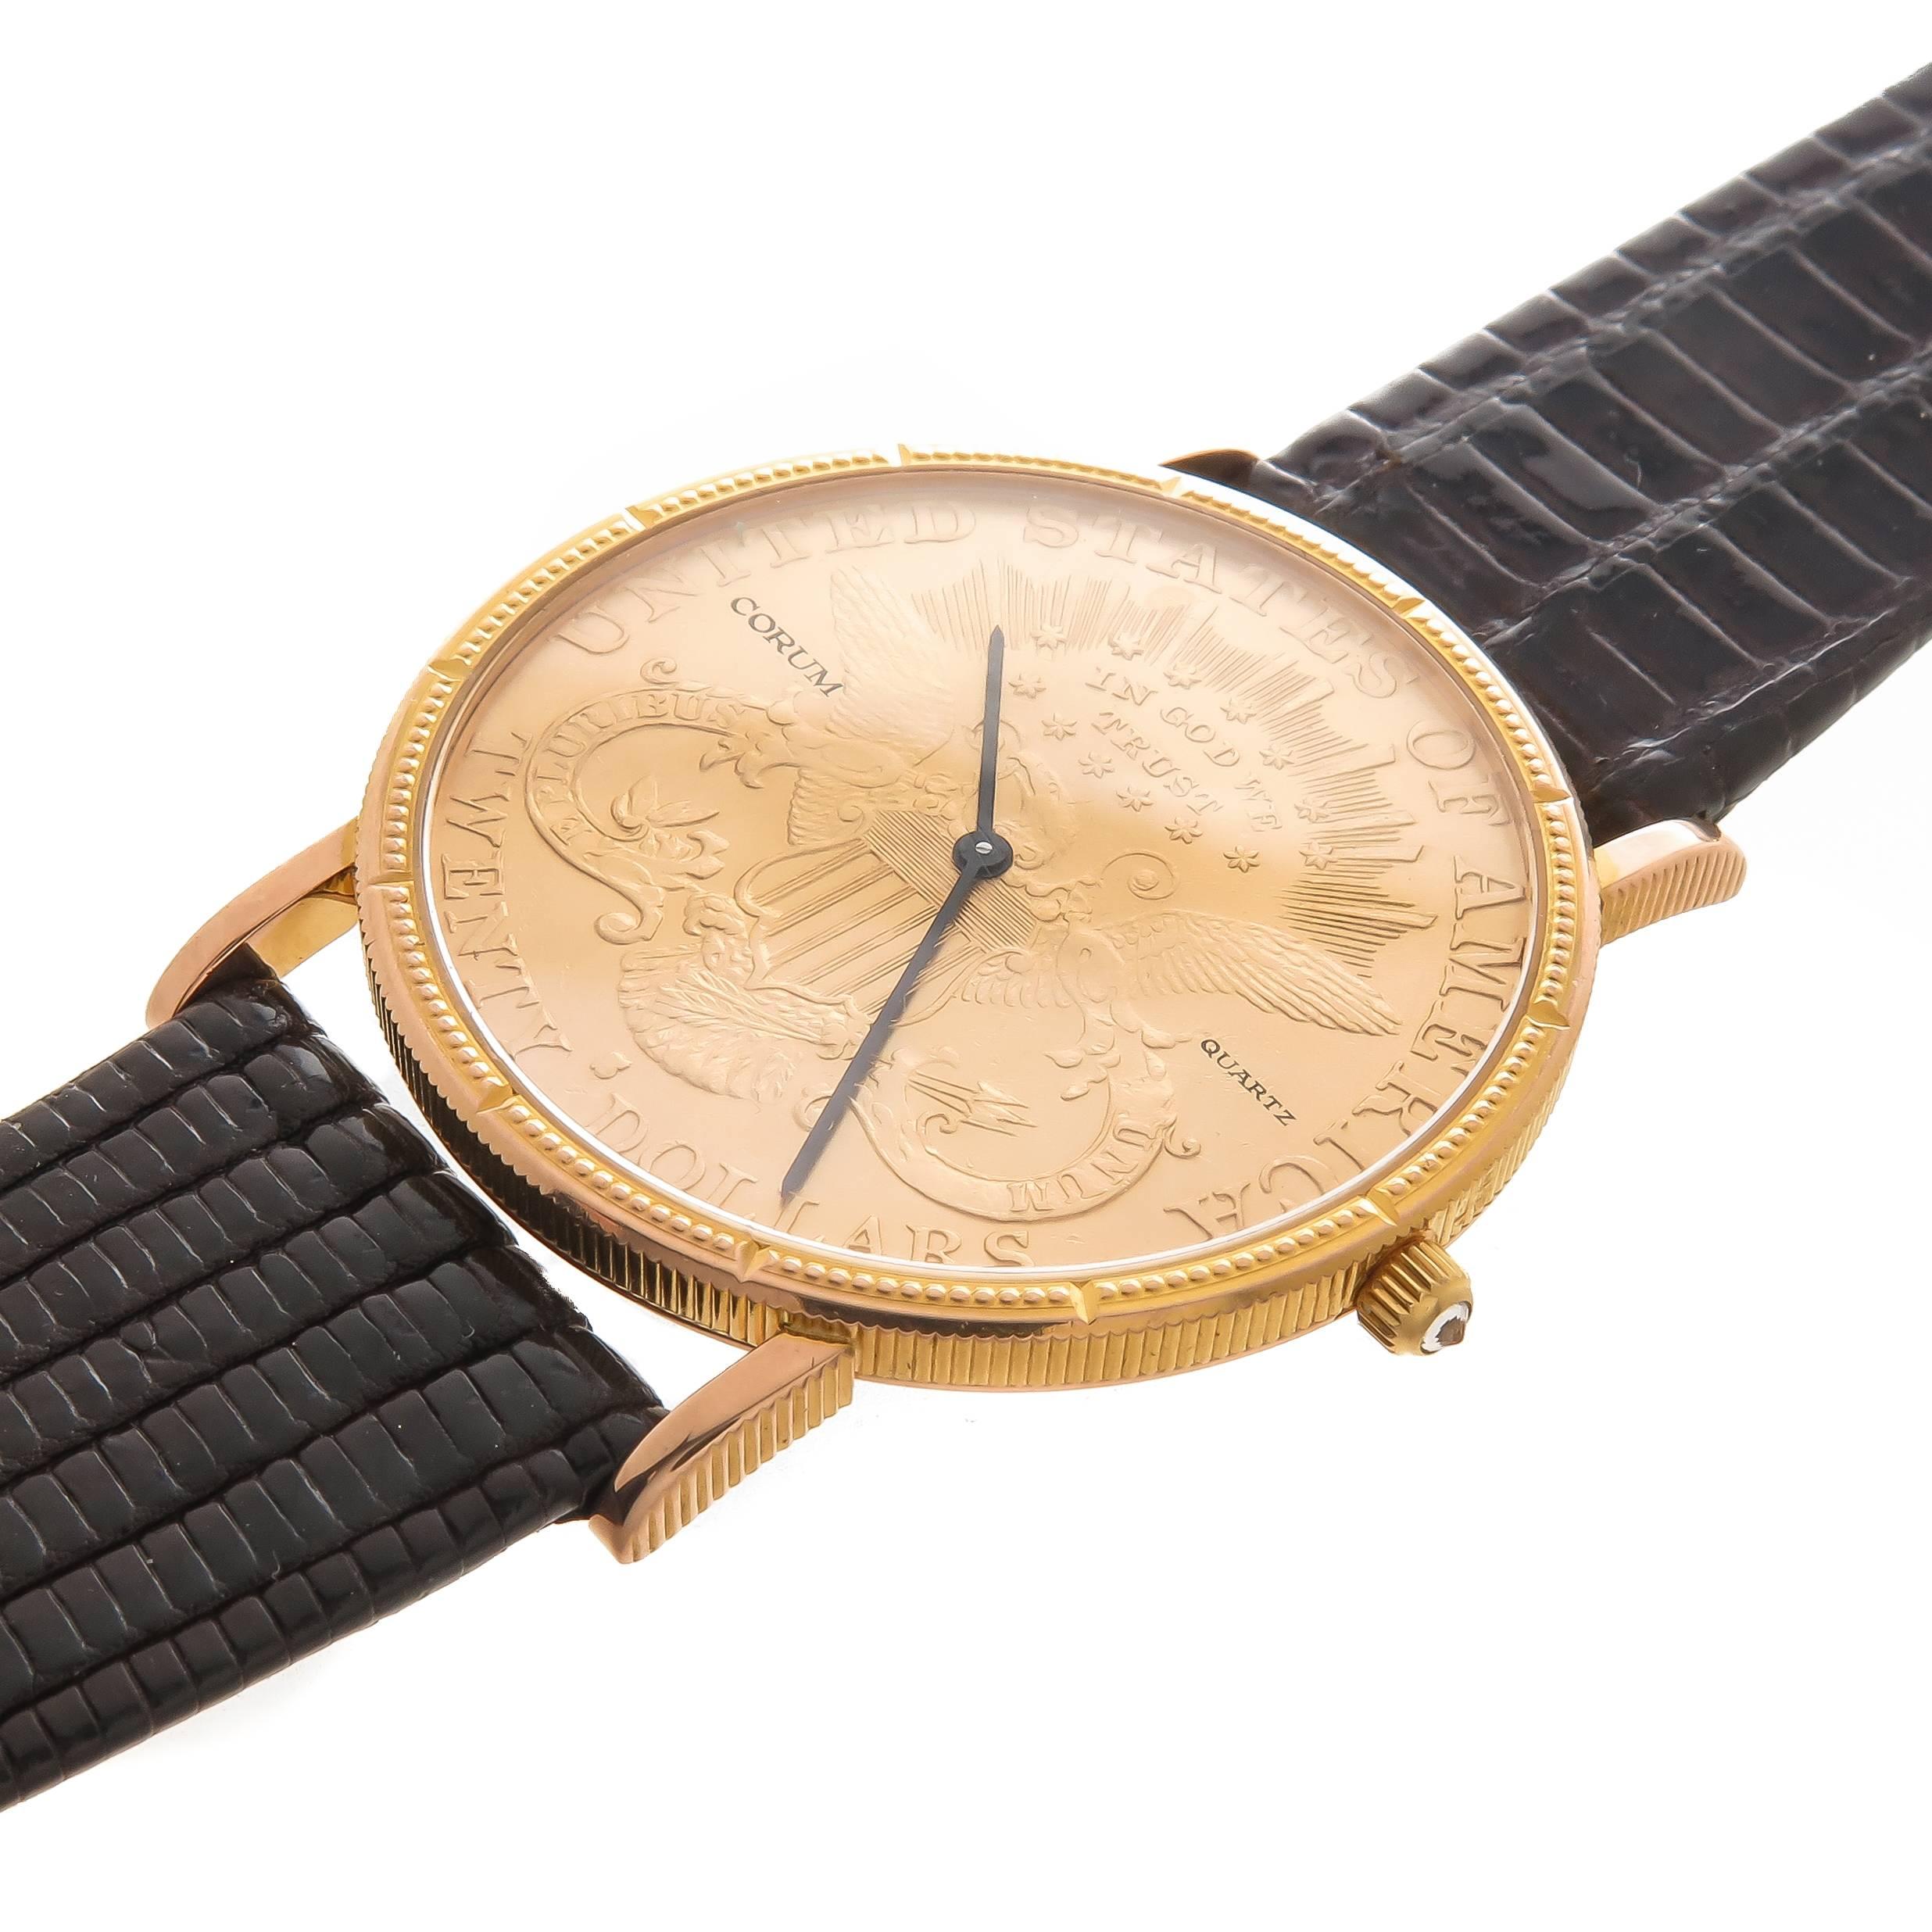 Circa 1980s Corum $20 Gold Coin Watch, 35 MM 18K yellow Gold Case, made from a Genuine U.S.  $20 Gold Coin. Quartz Movement, Scratch resistant crystal and a Diamond set Crown. New Hadley Roma Brown Lizard Strap with original Corum 18K Gold Buckle.